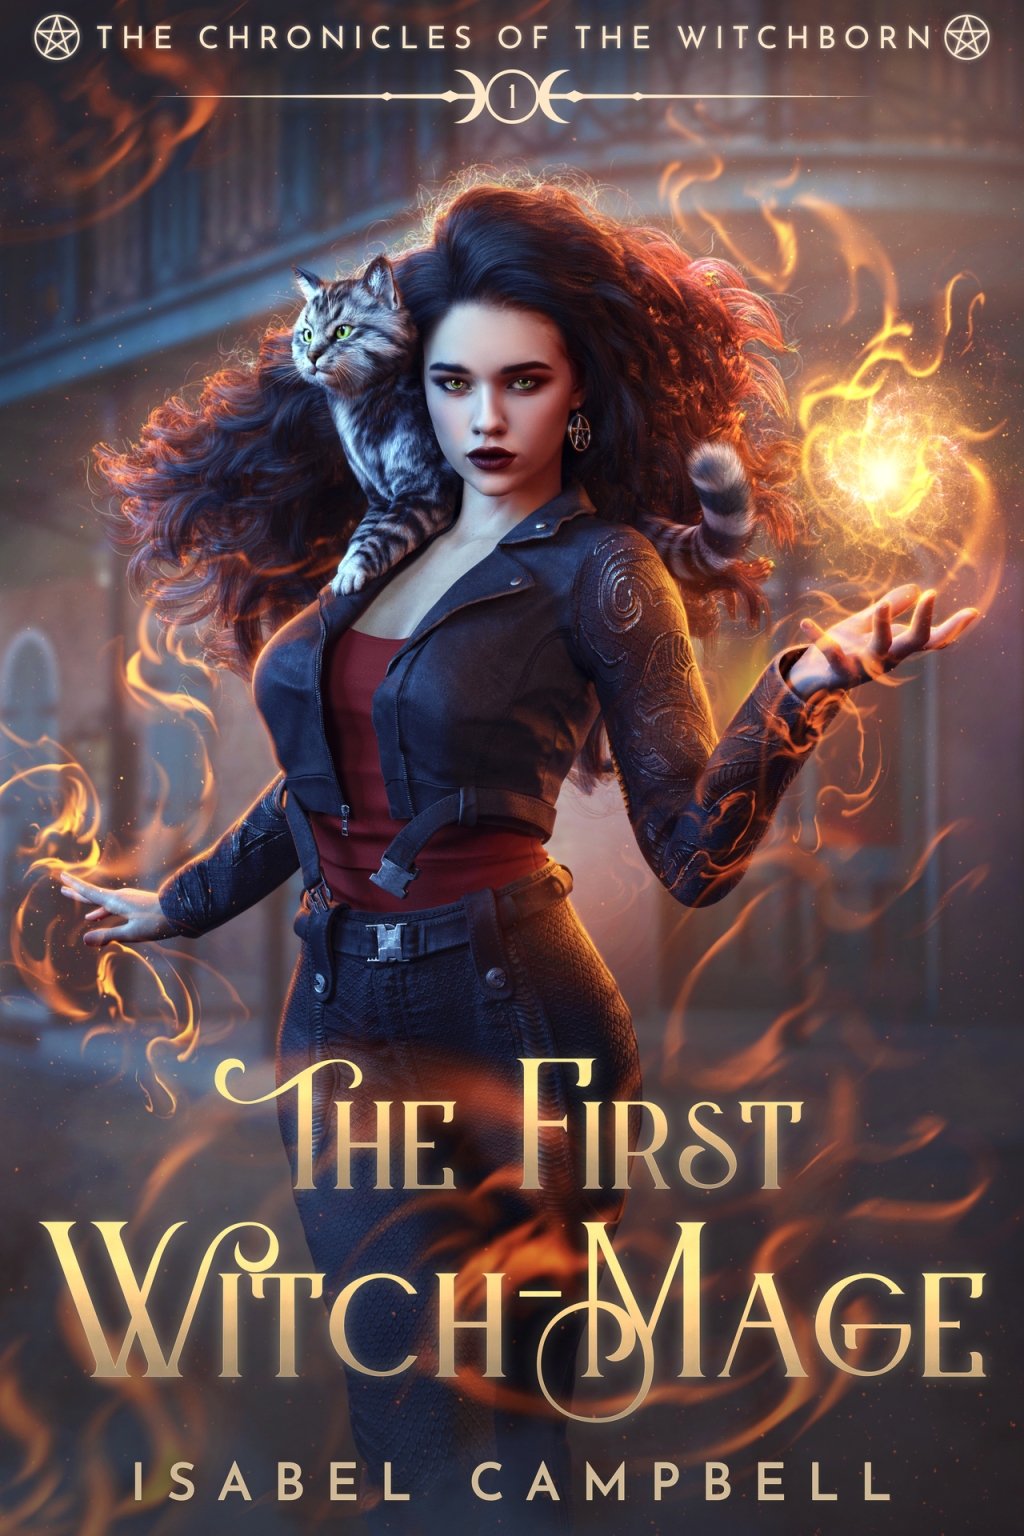 The Chronicles of the Witch Born books 1 & 2 – Pretty okay start.